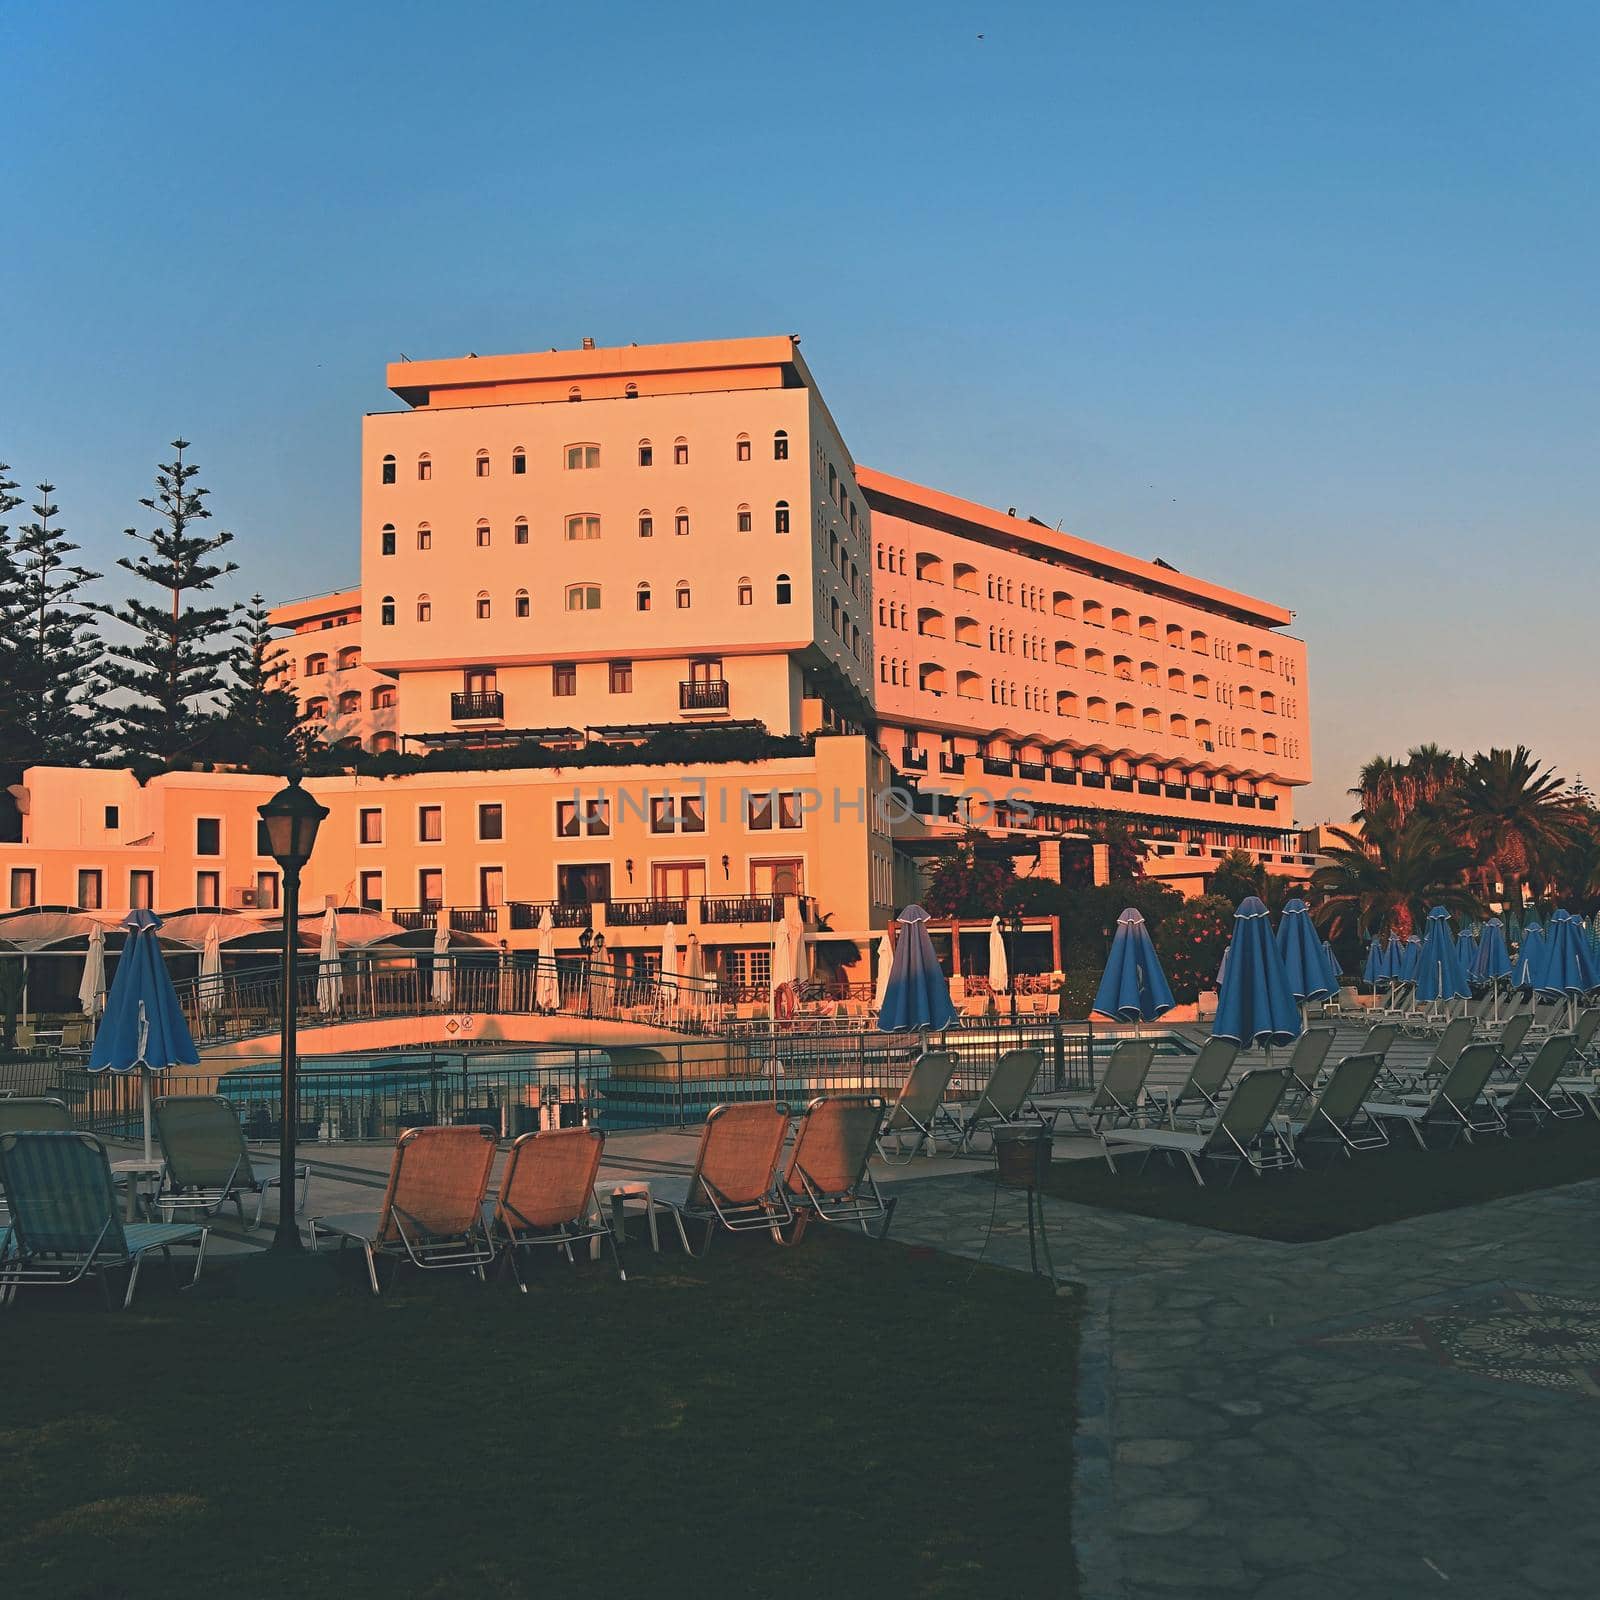 Beautiful hotel - beach resort at sunset. Summer background for travel and holidays. Greece Crete. by Montypeter